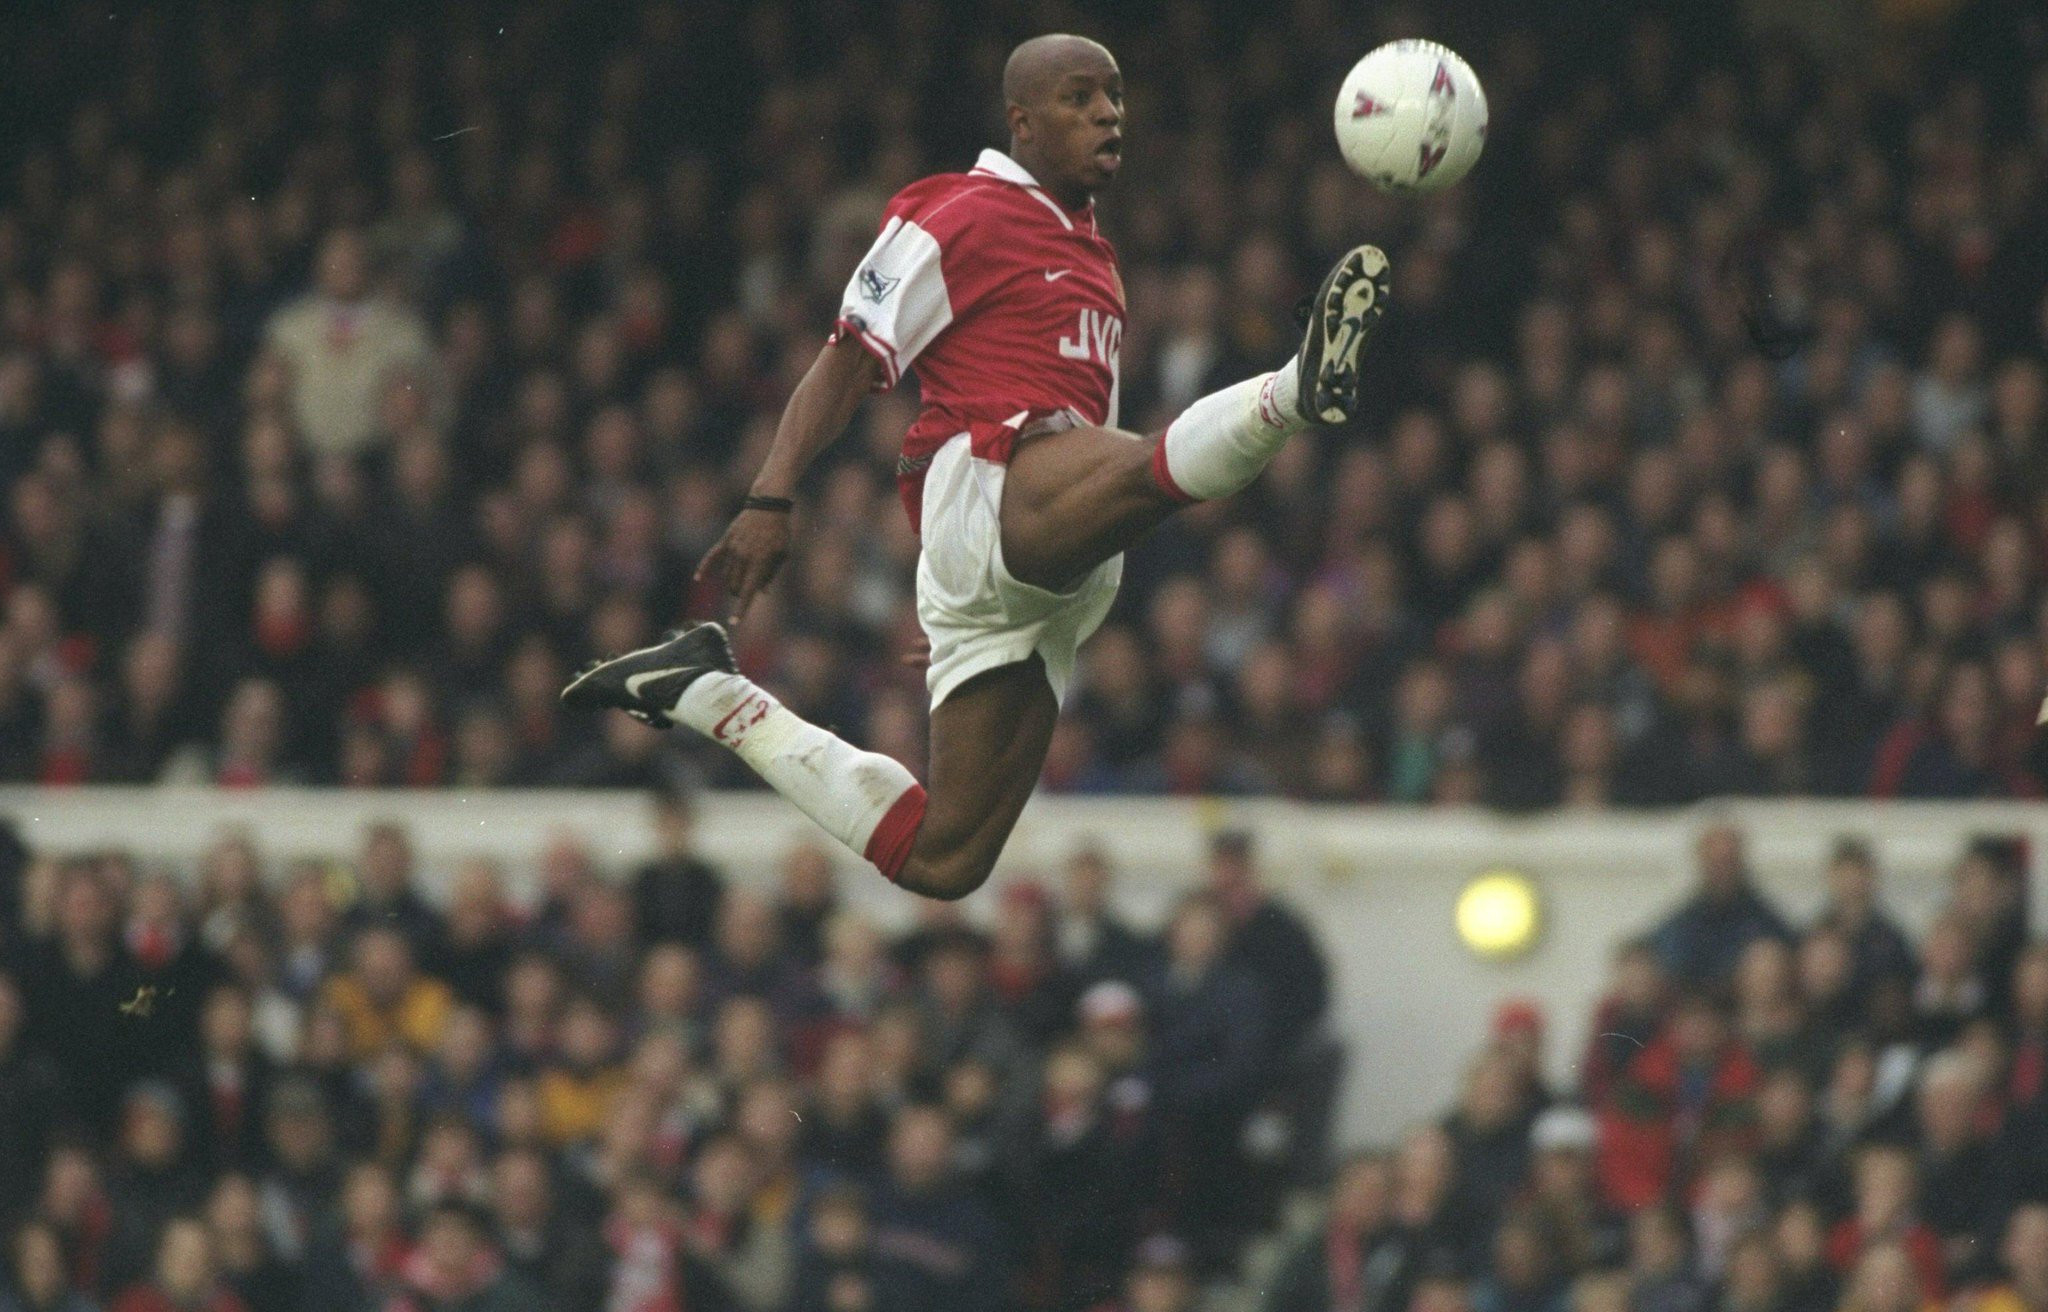 Happy 51st birthday to Ian Wright! Only Thierry Henry has scored more goals for Arsenal (228) than Wright (185). 